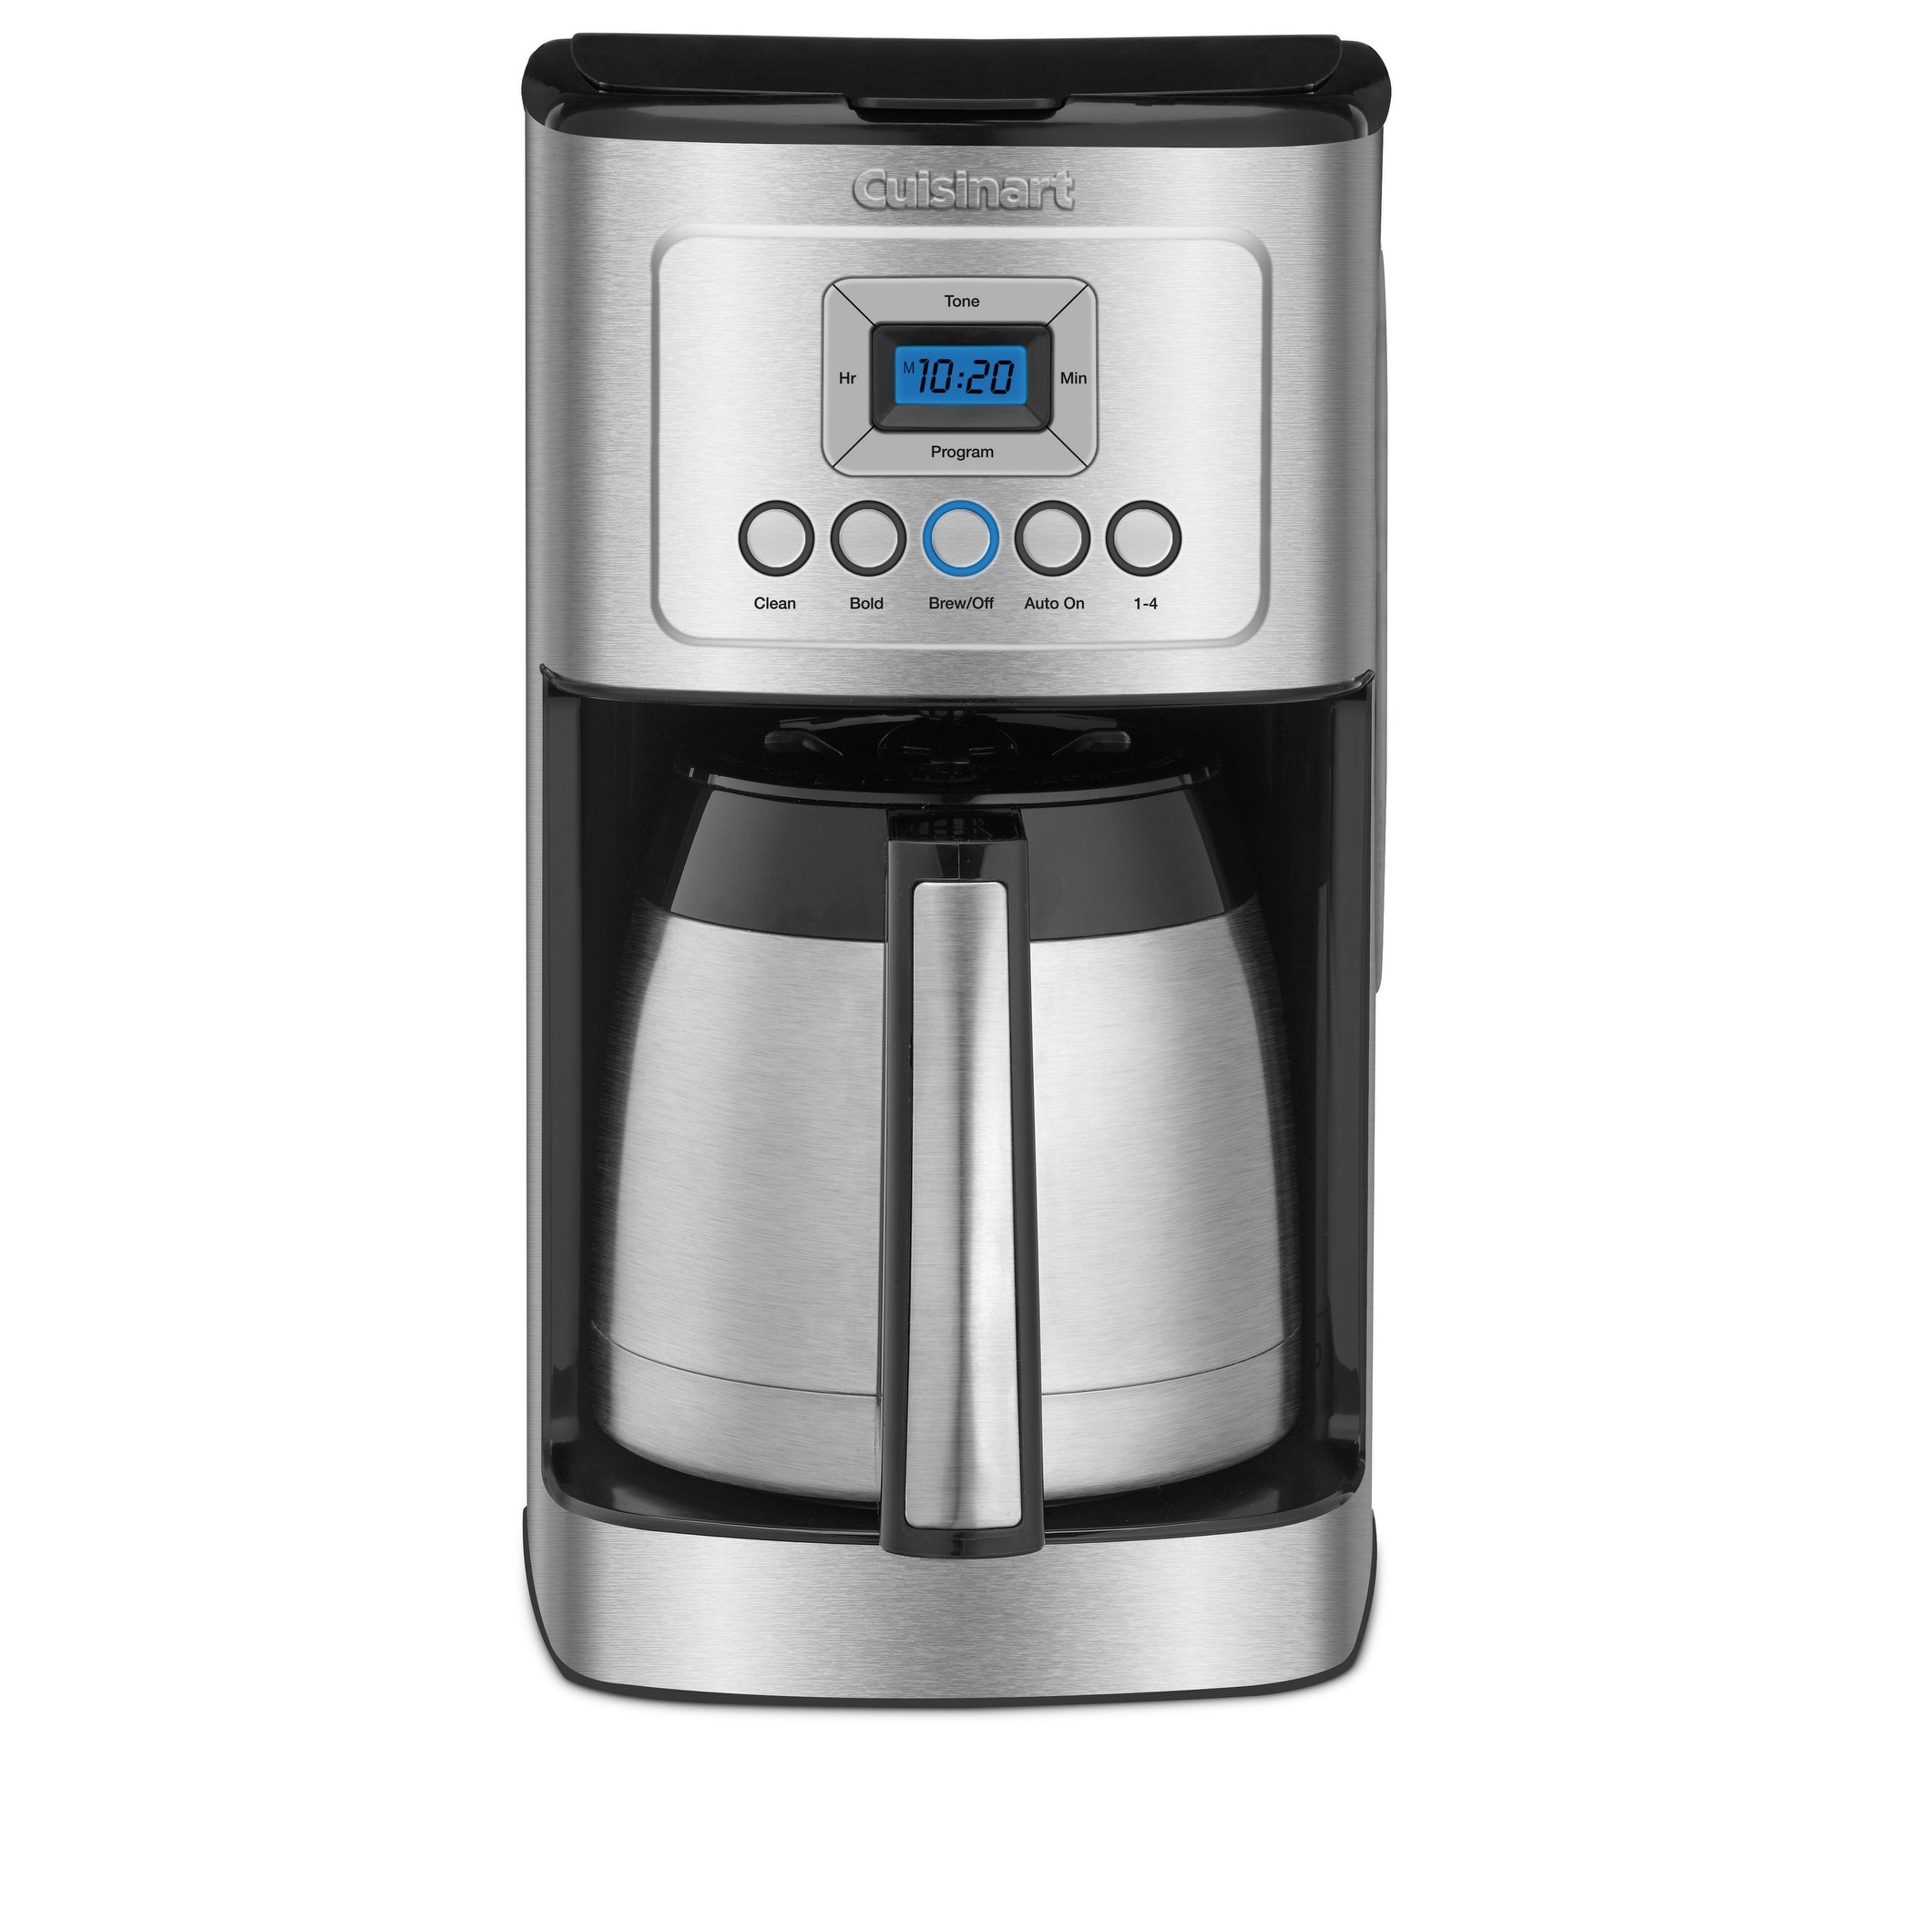 https://ak1.ostkcdn.com/images/products/is/images/direct/182ec17c2f86a60e72cd8b7d18004e526a7ad462/12-Cup-PerfecTemp-Programmable-Coffeemaker-%28Thermal-Carafe%29.jpg